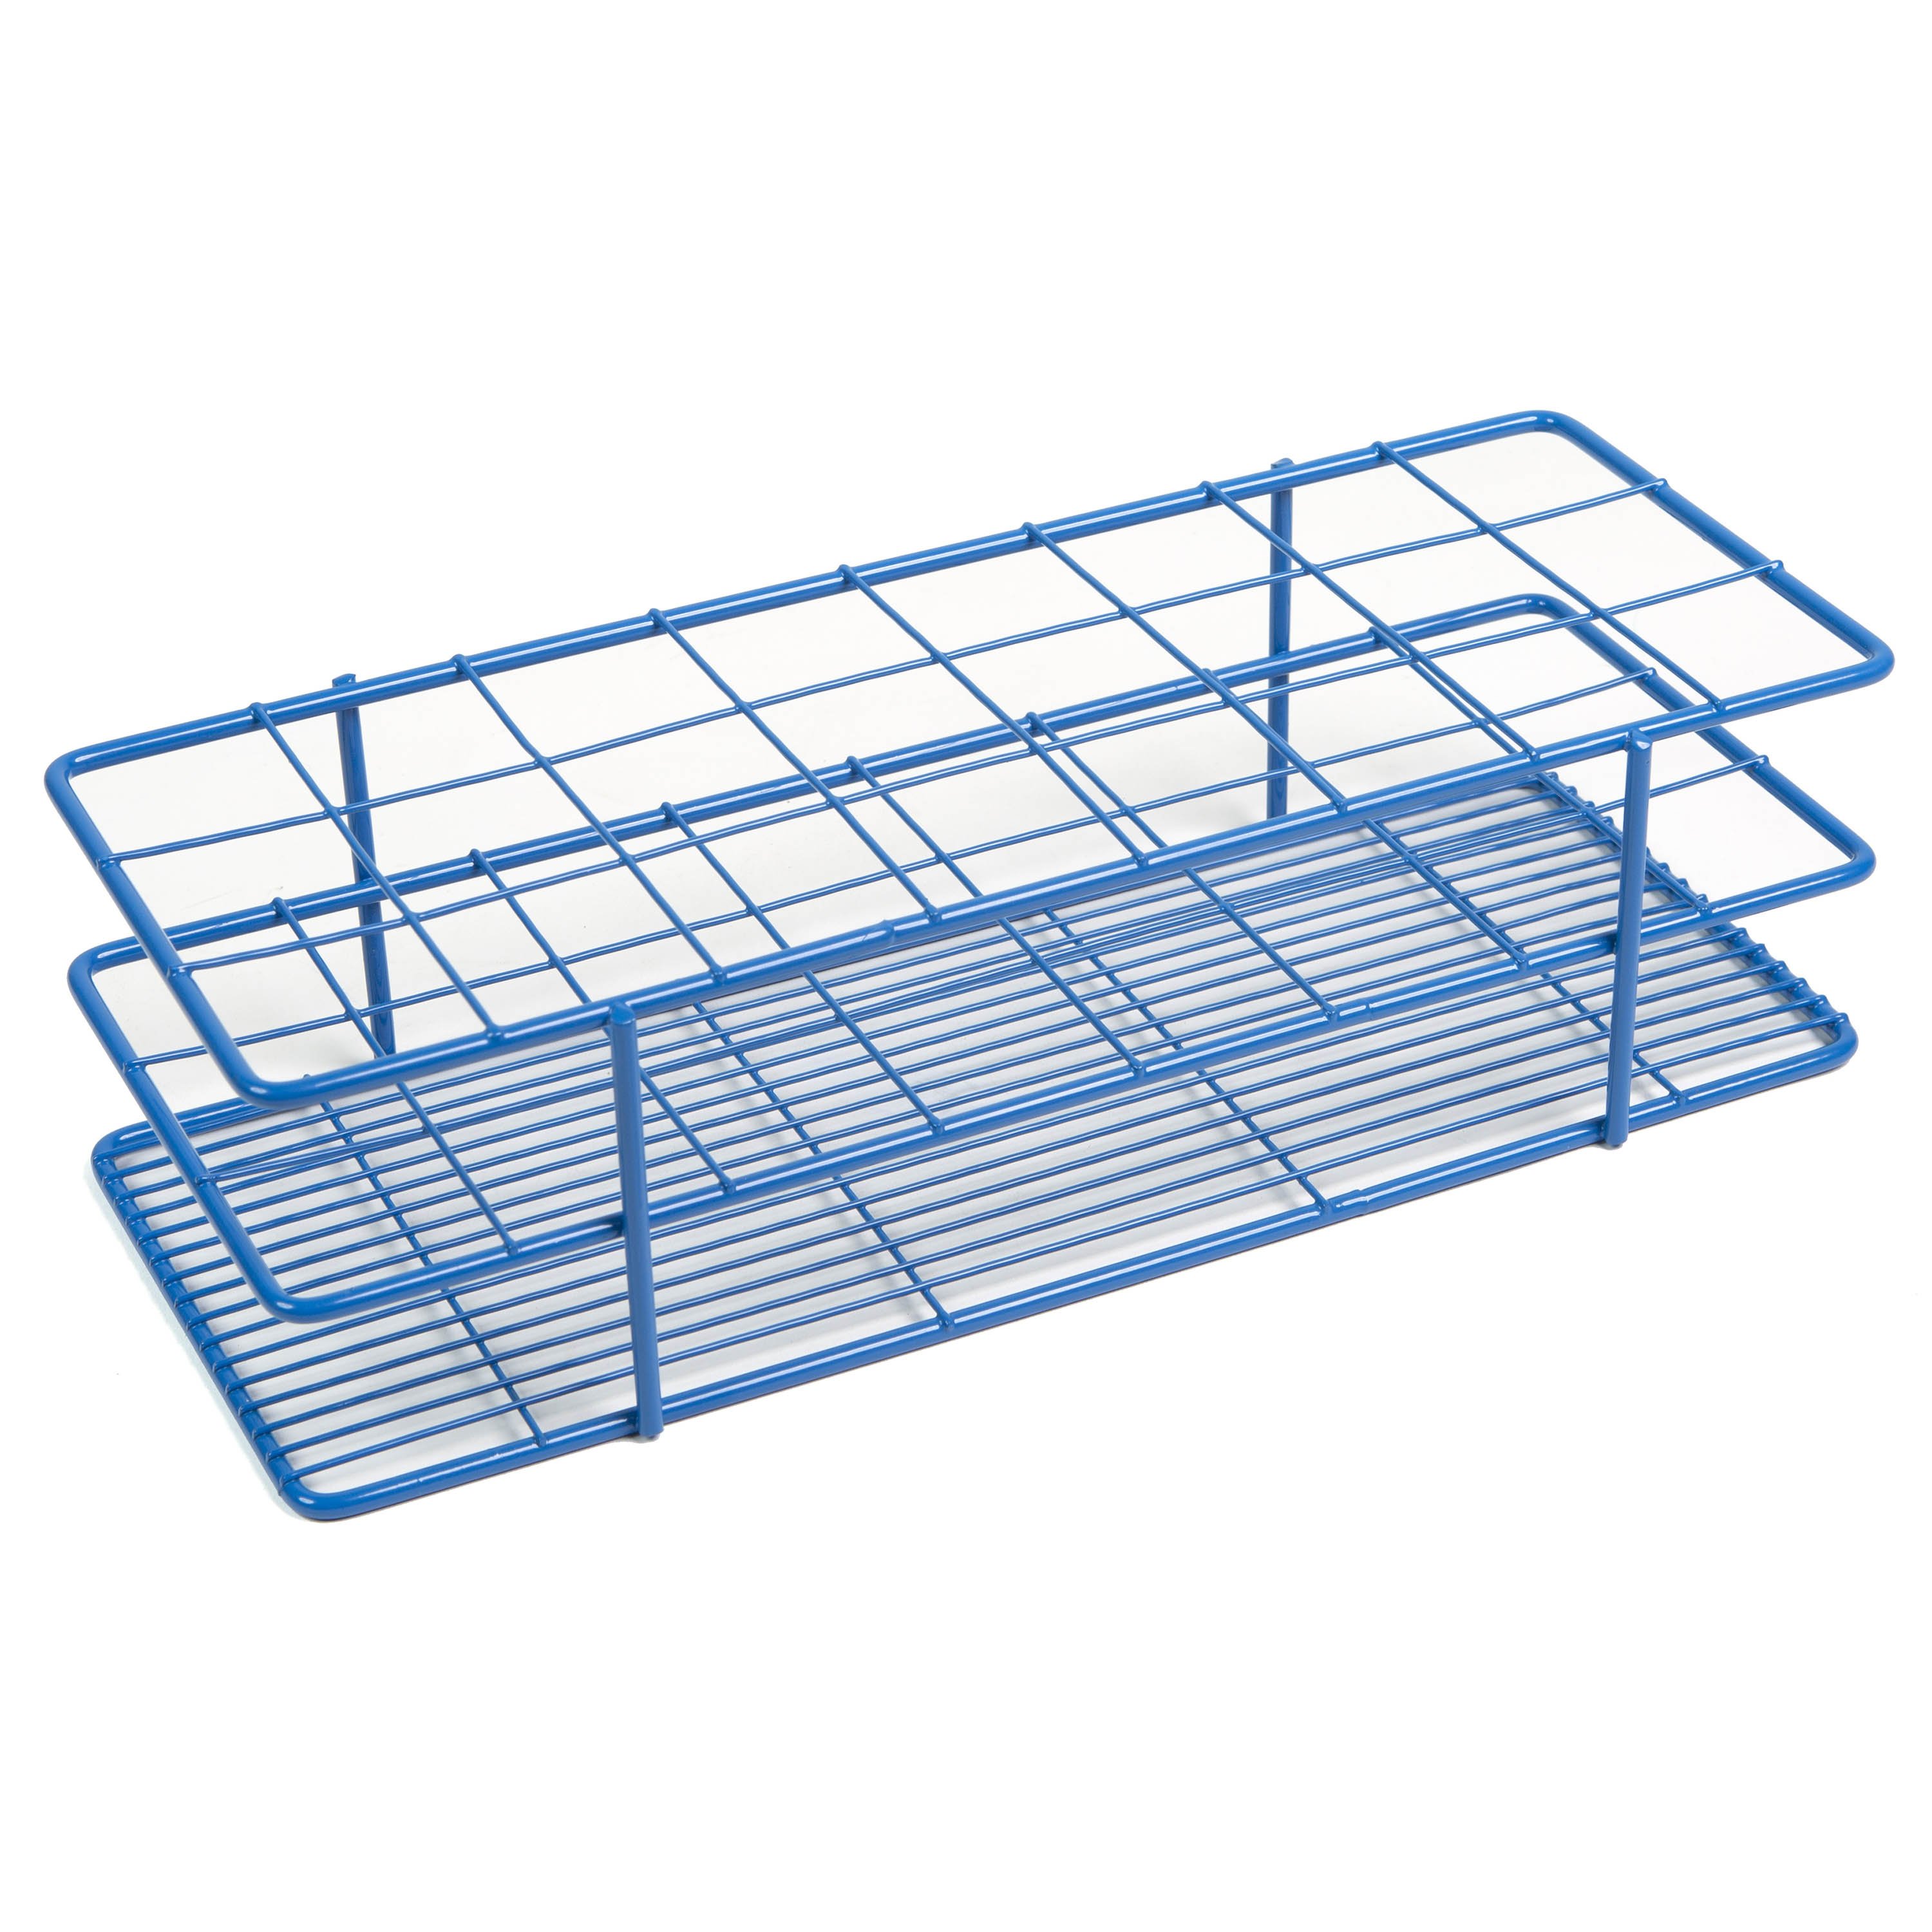 Coated Wire Rack - Fits 30-40mm Tubes, 24-Well, Blue